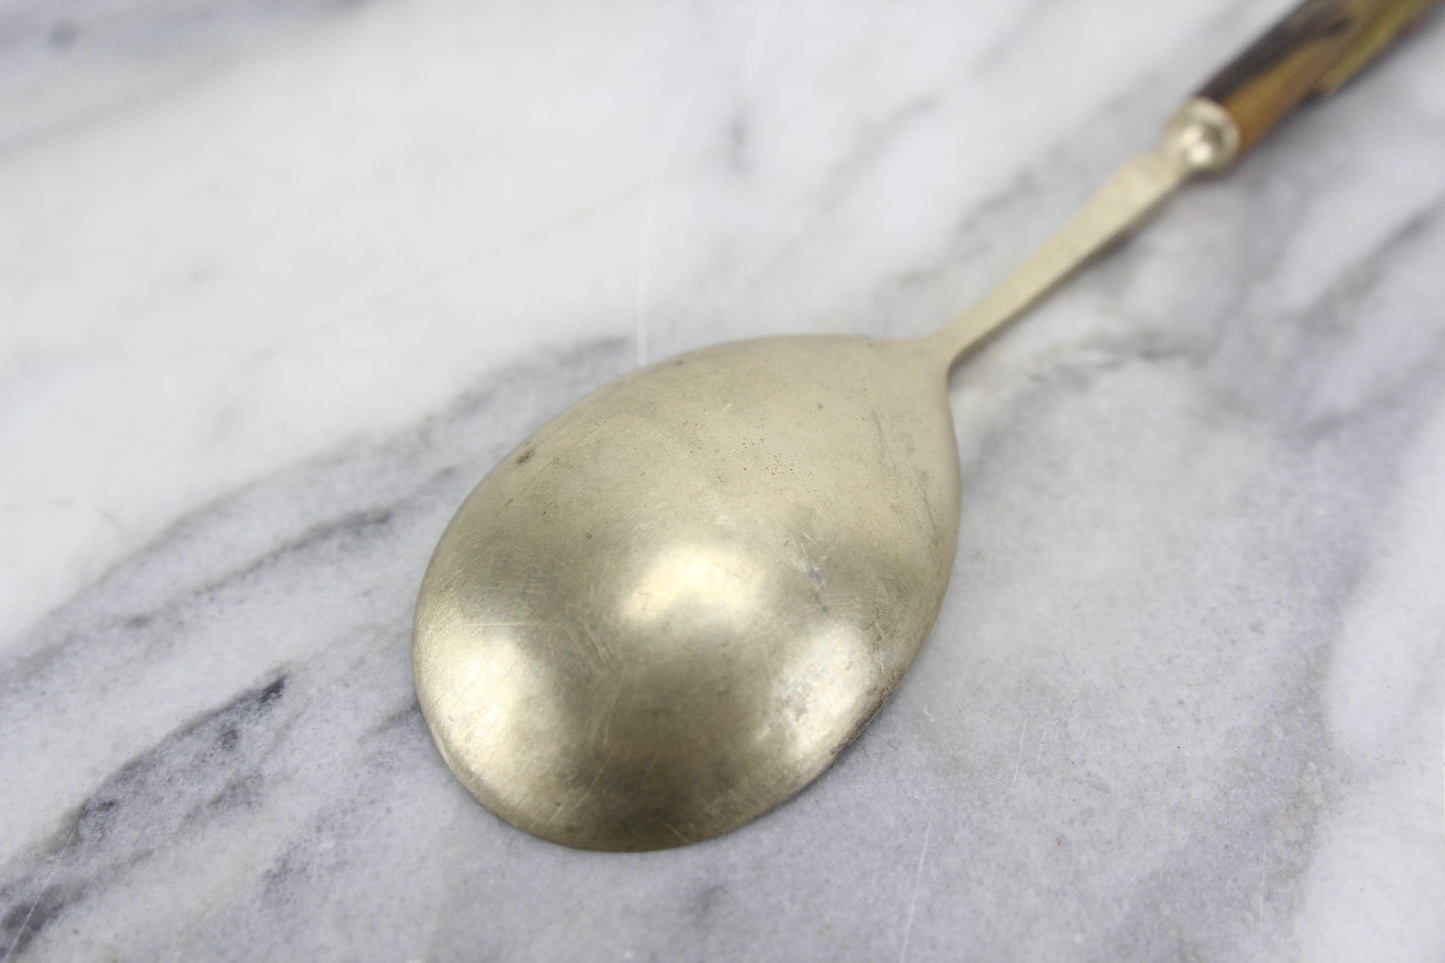 Serving Spoon with Figural Bird Handle, Made in Lebanon